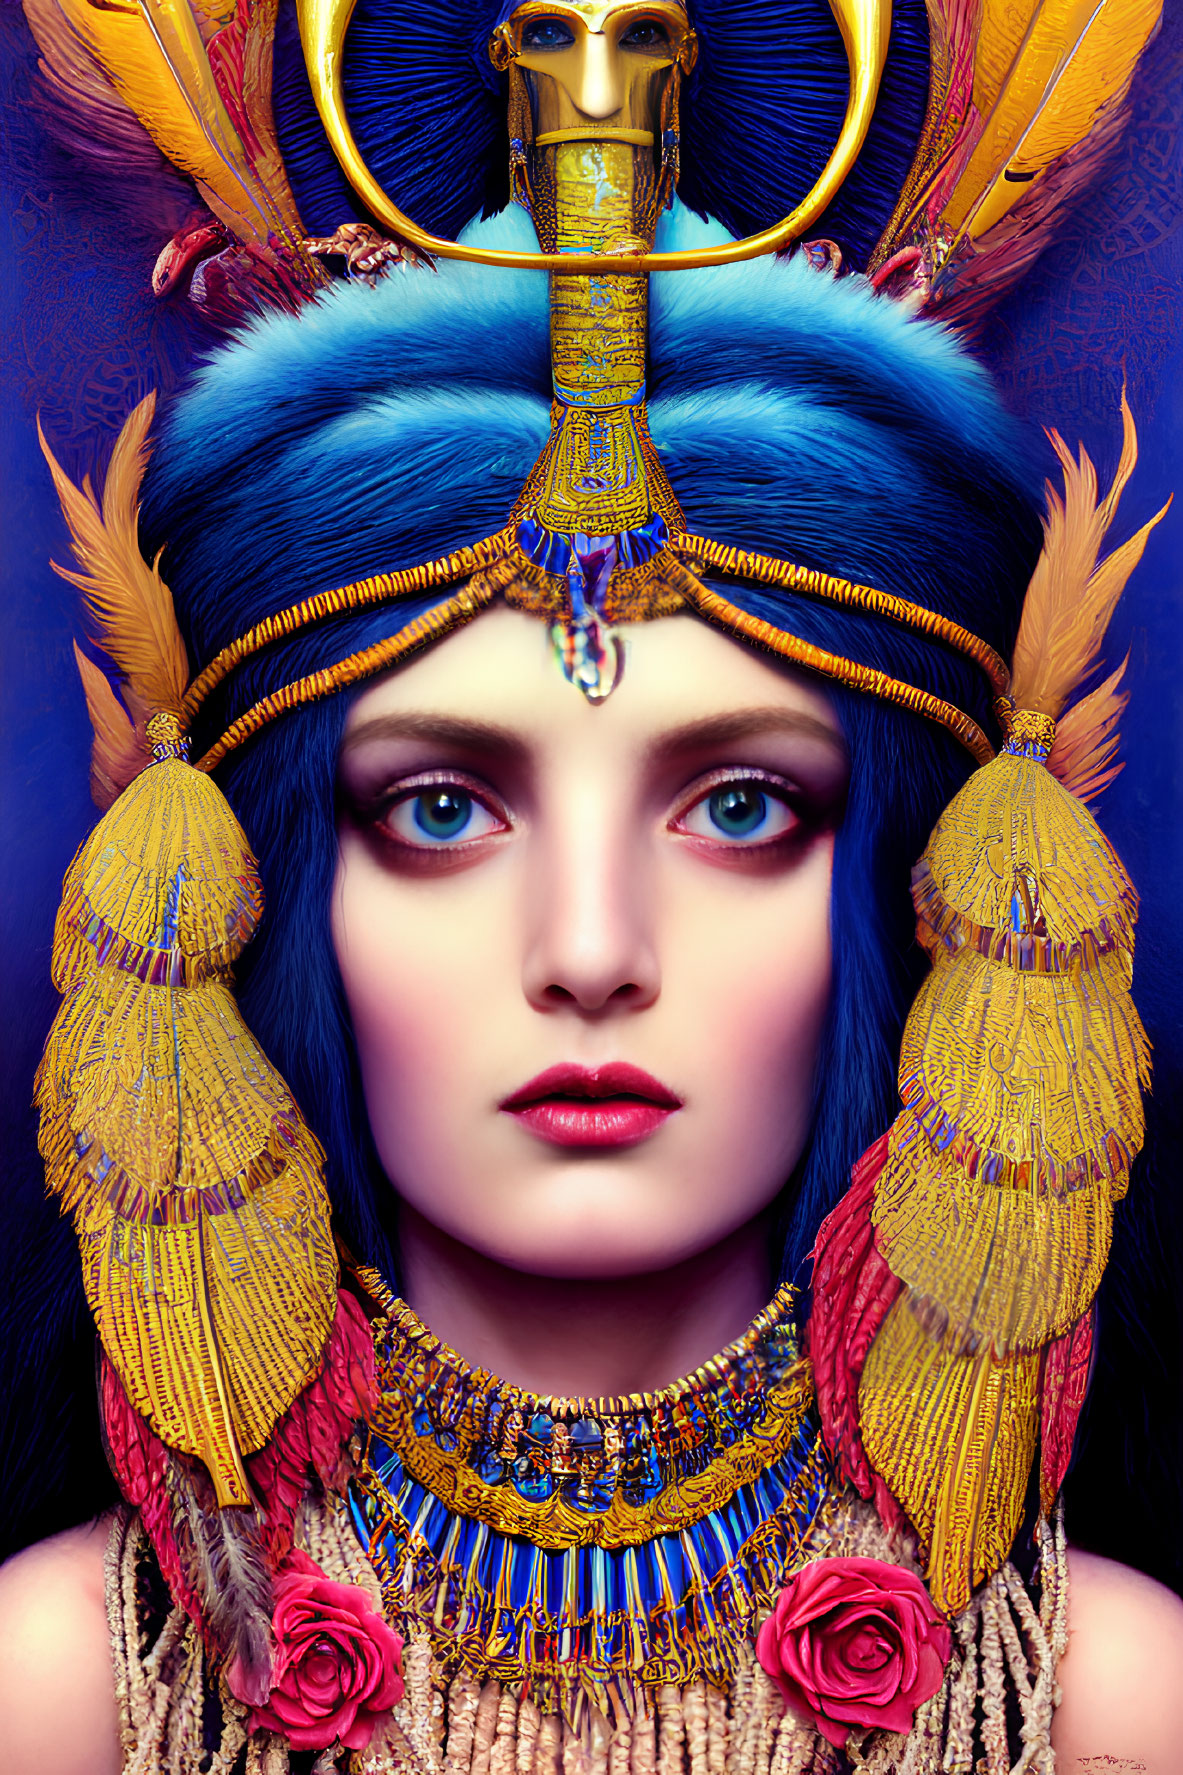 Colorful portrait of woman with blue skin in Egyptian headdress and gold jewelry